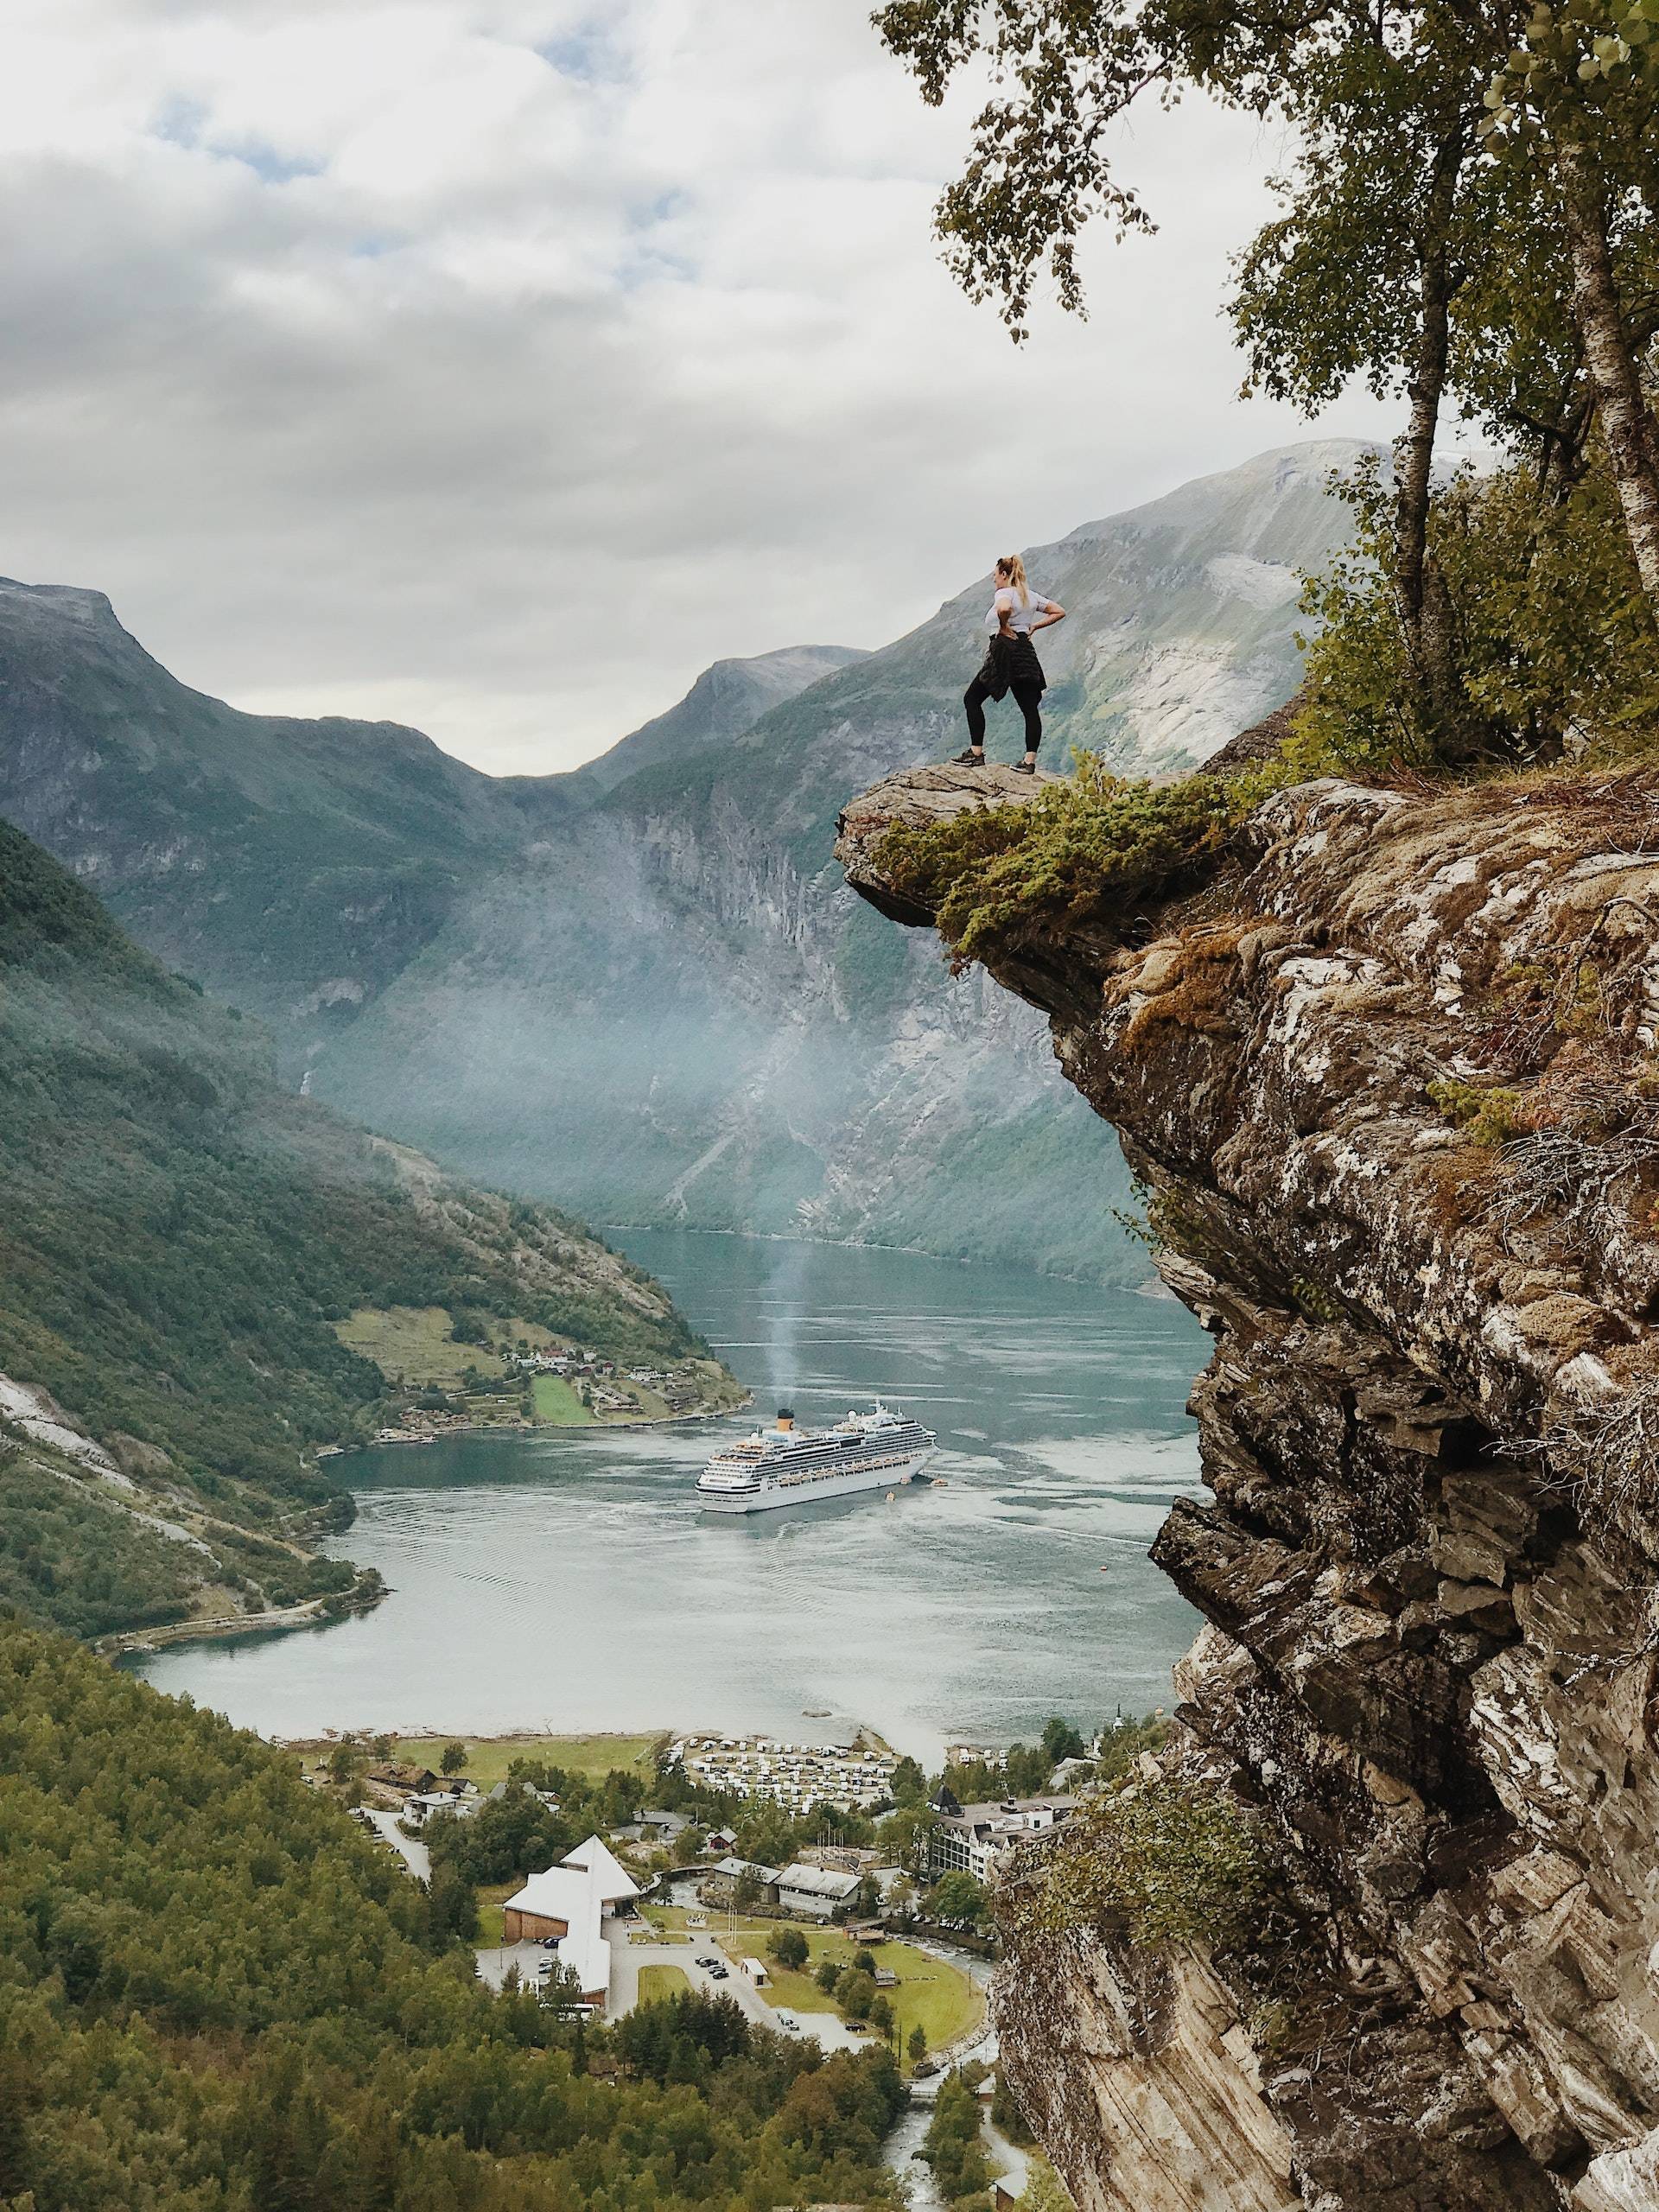 Person standing on rock ledge overlooking town in the valley